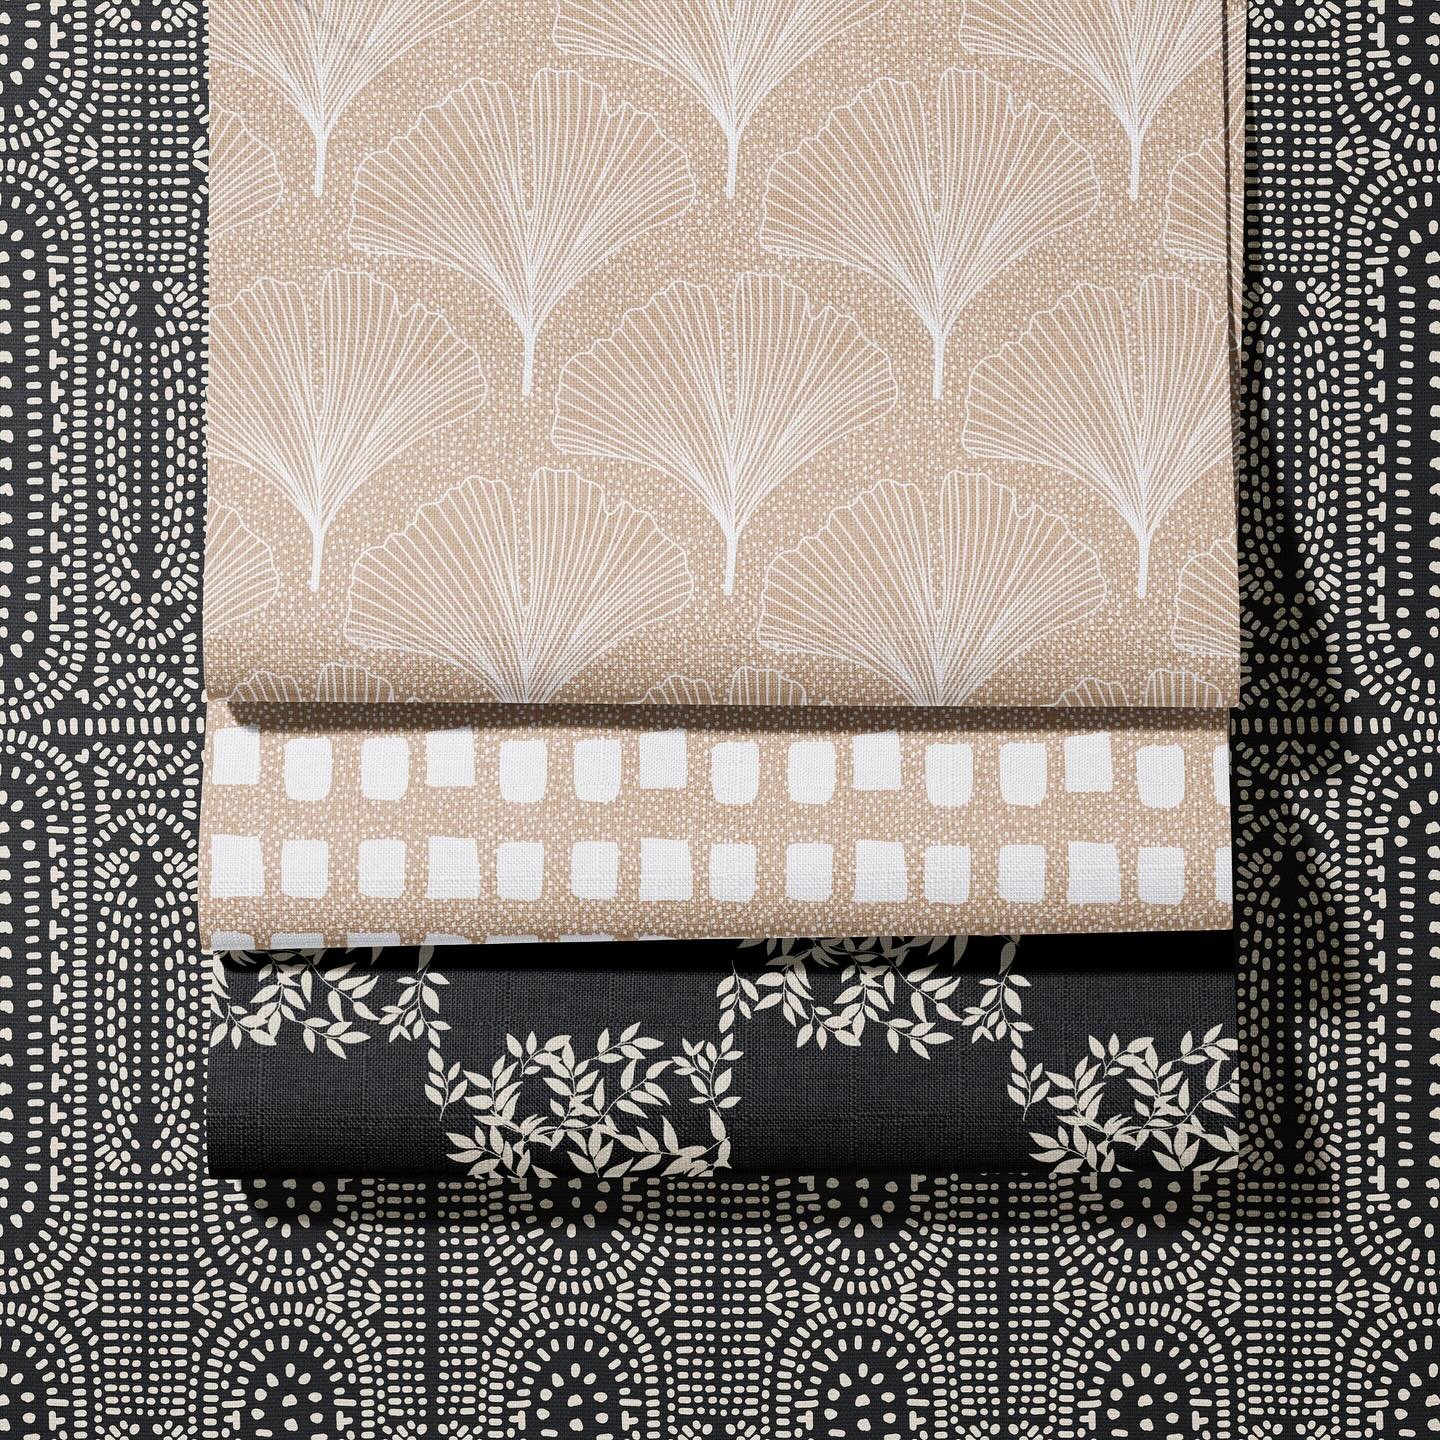 Another collection of neutrals. Come see it all in our @spoonflower shop called Modern Shape Neutrals 〰️ #neutralalwayswins #newcollection #surfacedesign @creatsyofficial